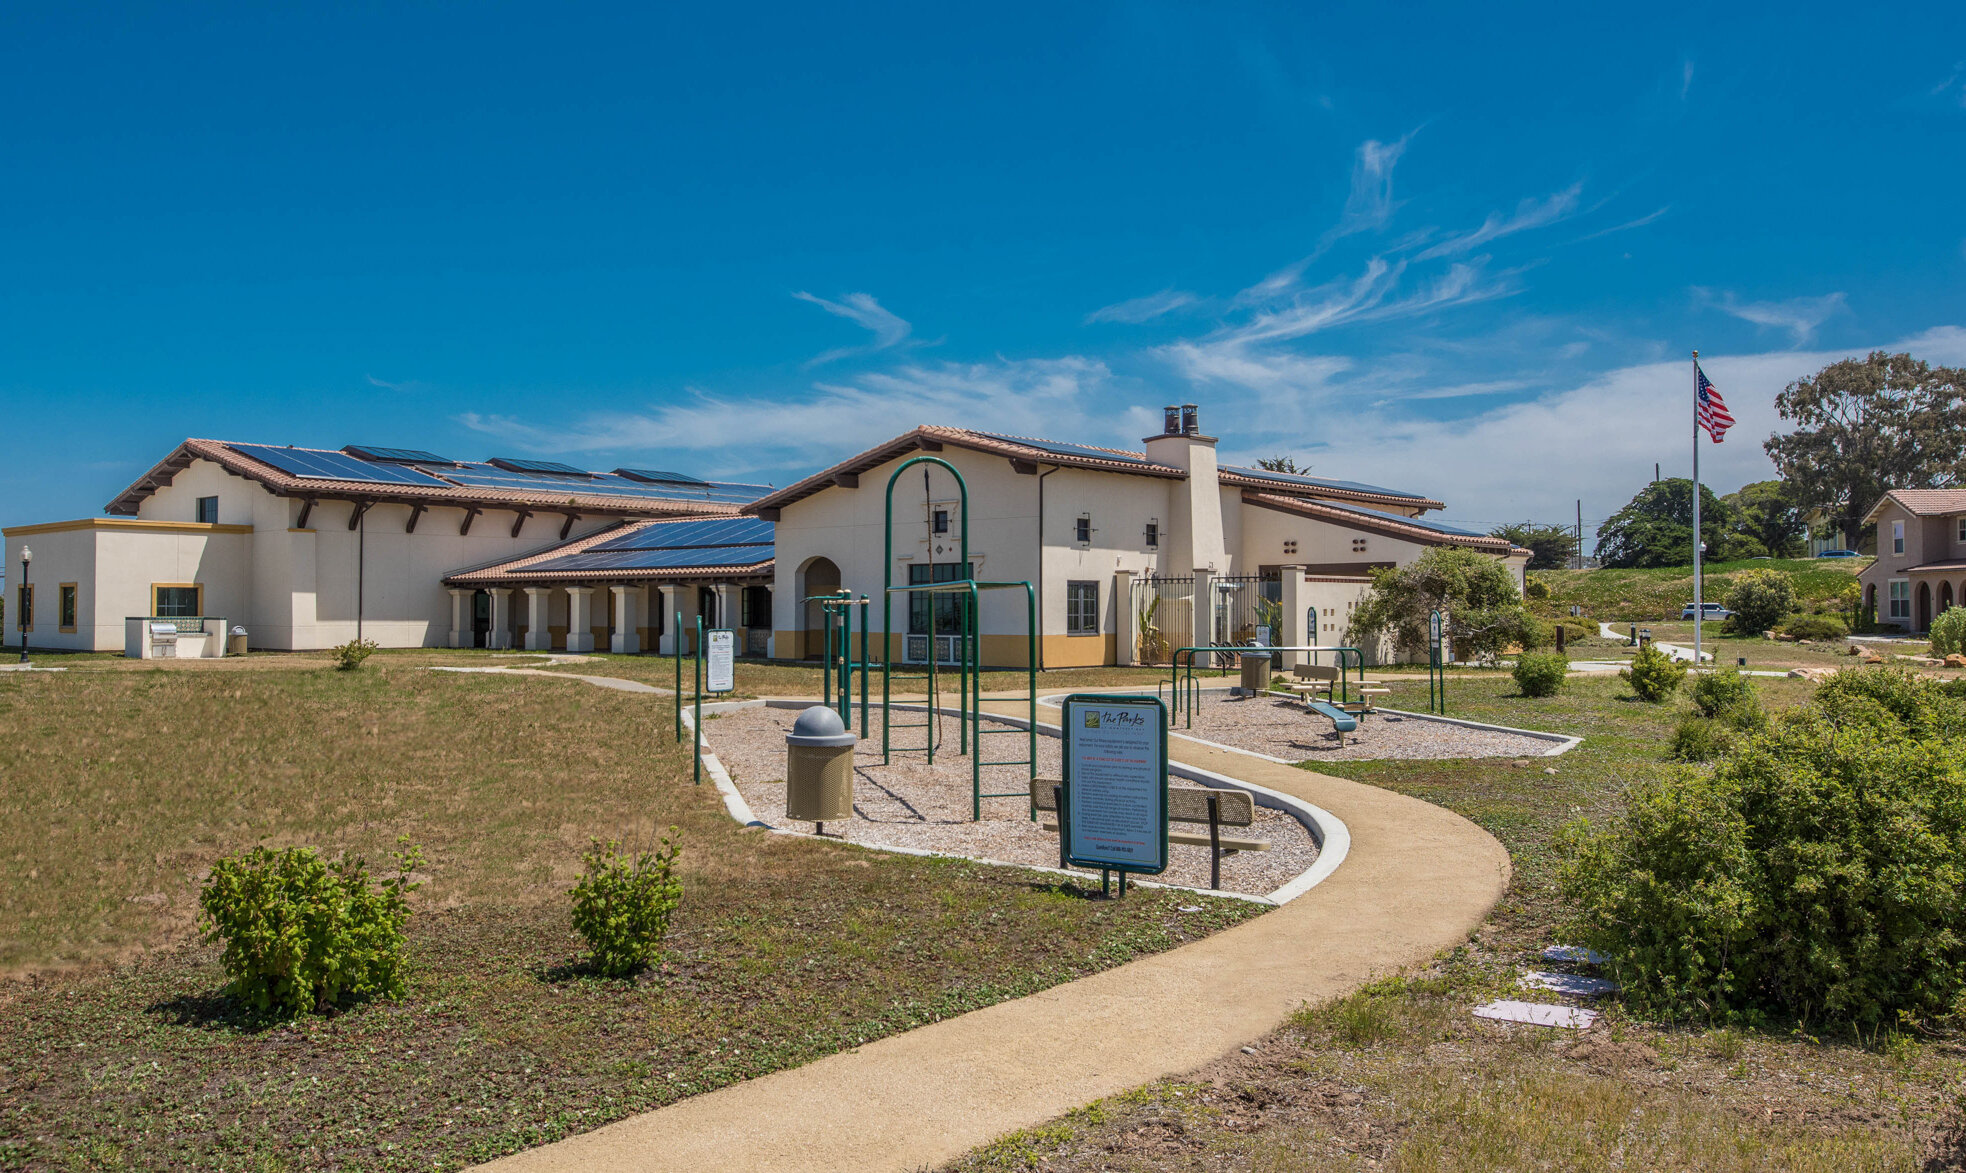 Both La Mesa Village and Fort Ord Village have their own community centers with fitness rooms and pools.